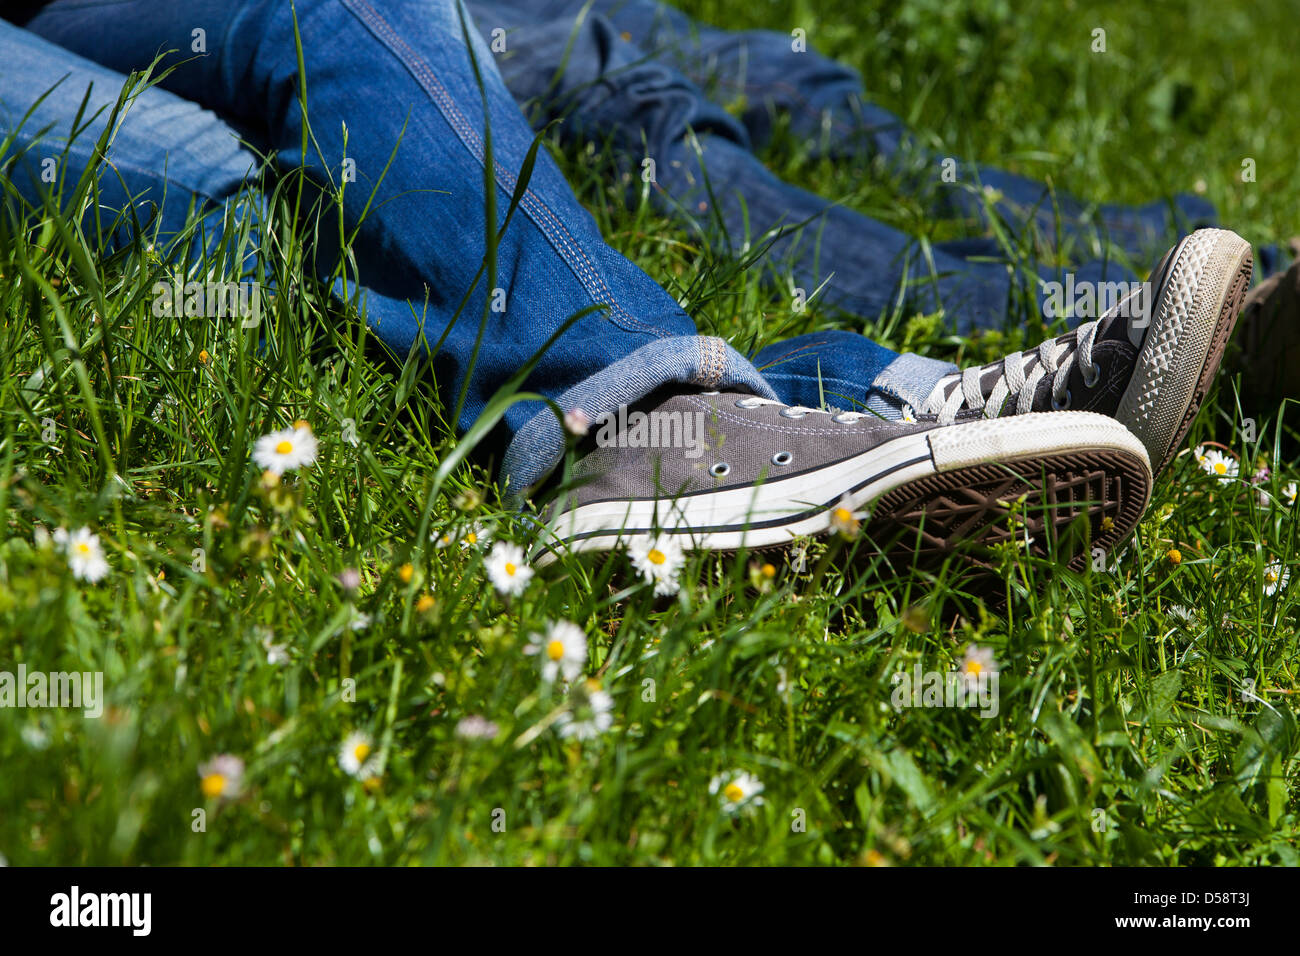 Youth relaxing no a grass field Stock Photo